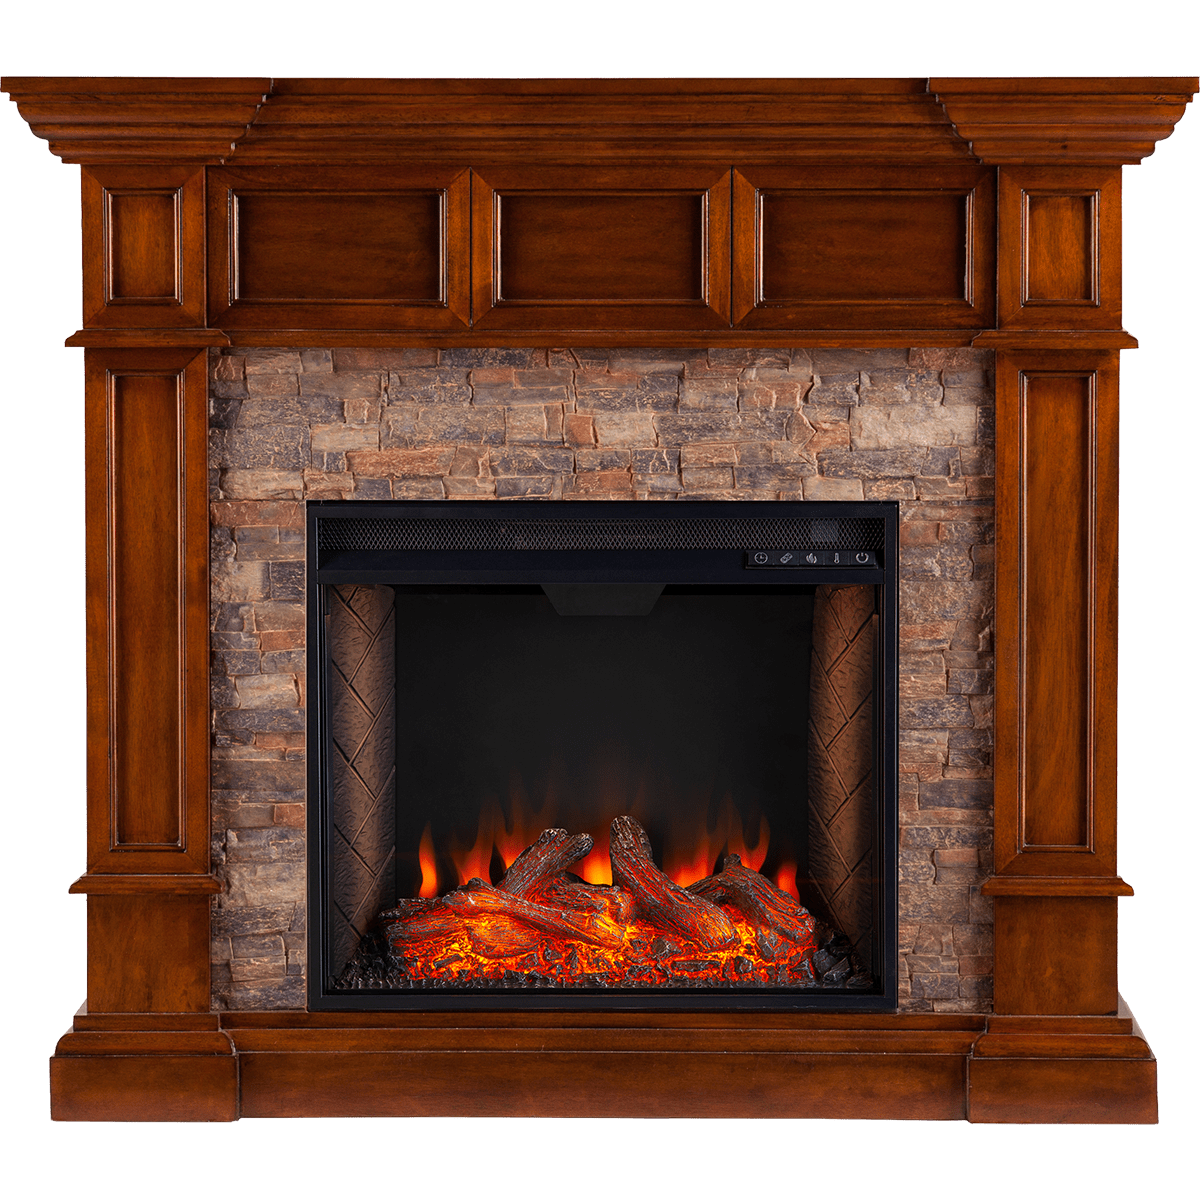 Electric Stone Fireplace with Mantel Unique southern Enterprises Merrimack Simulated Stone Convertible Electric Fireplace